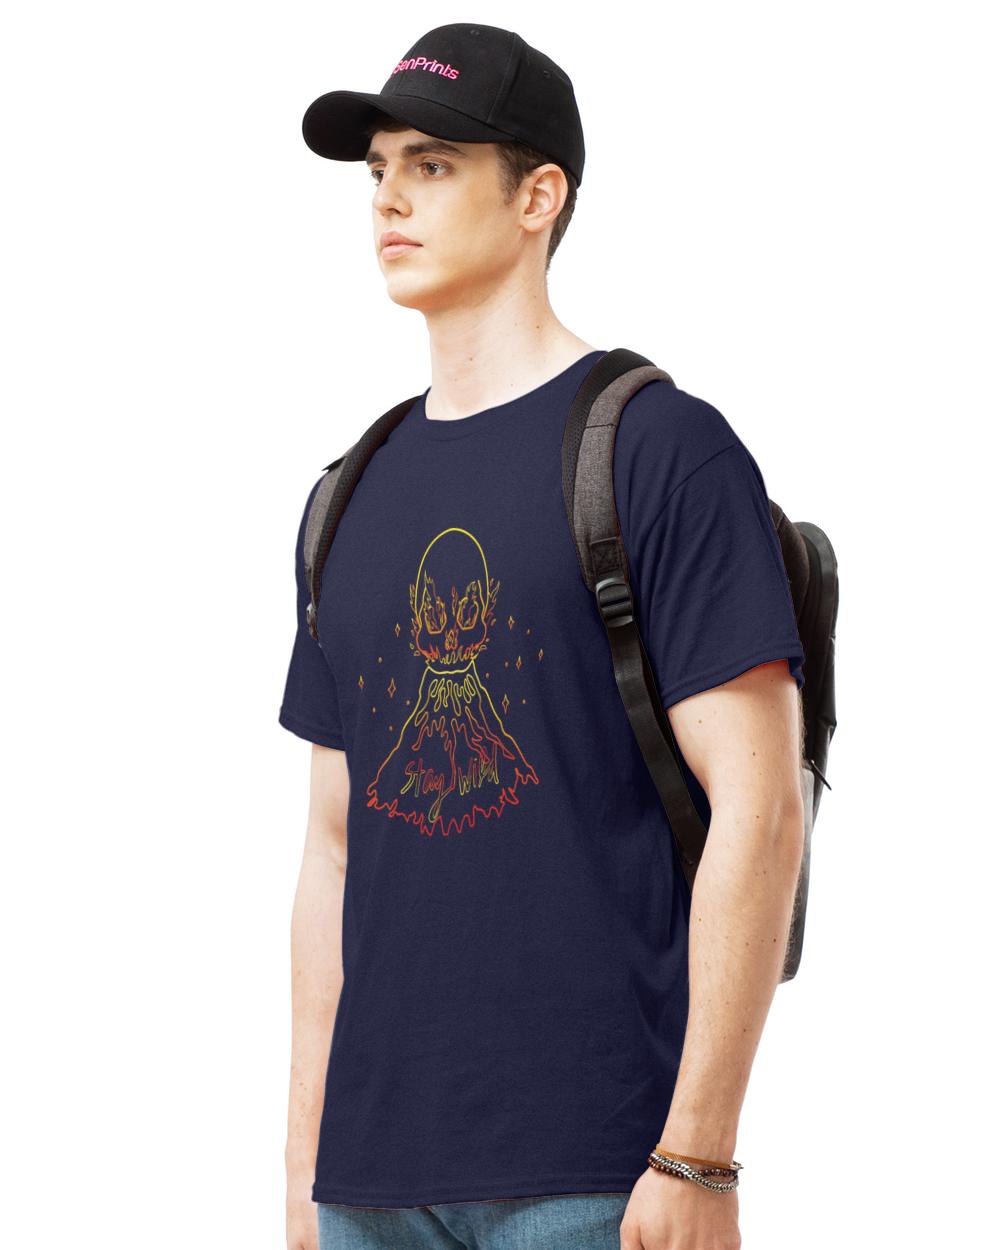 Volcano T- Shirt Stay wild cool volcano scull T- Shirt